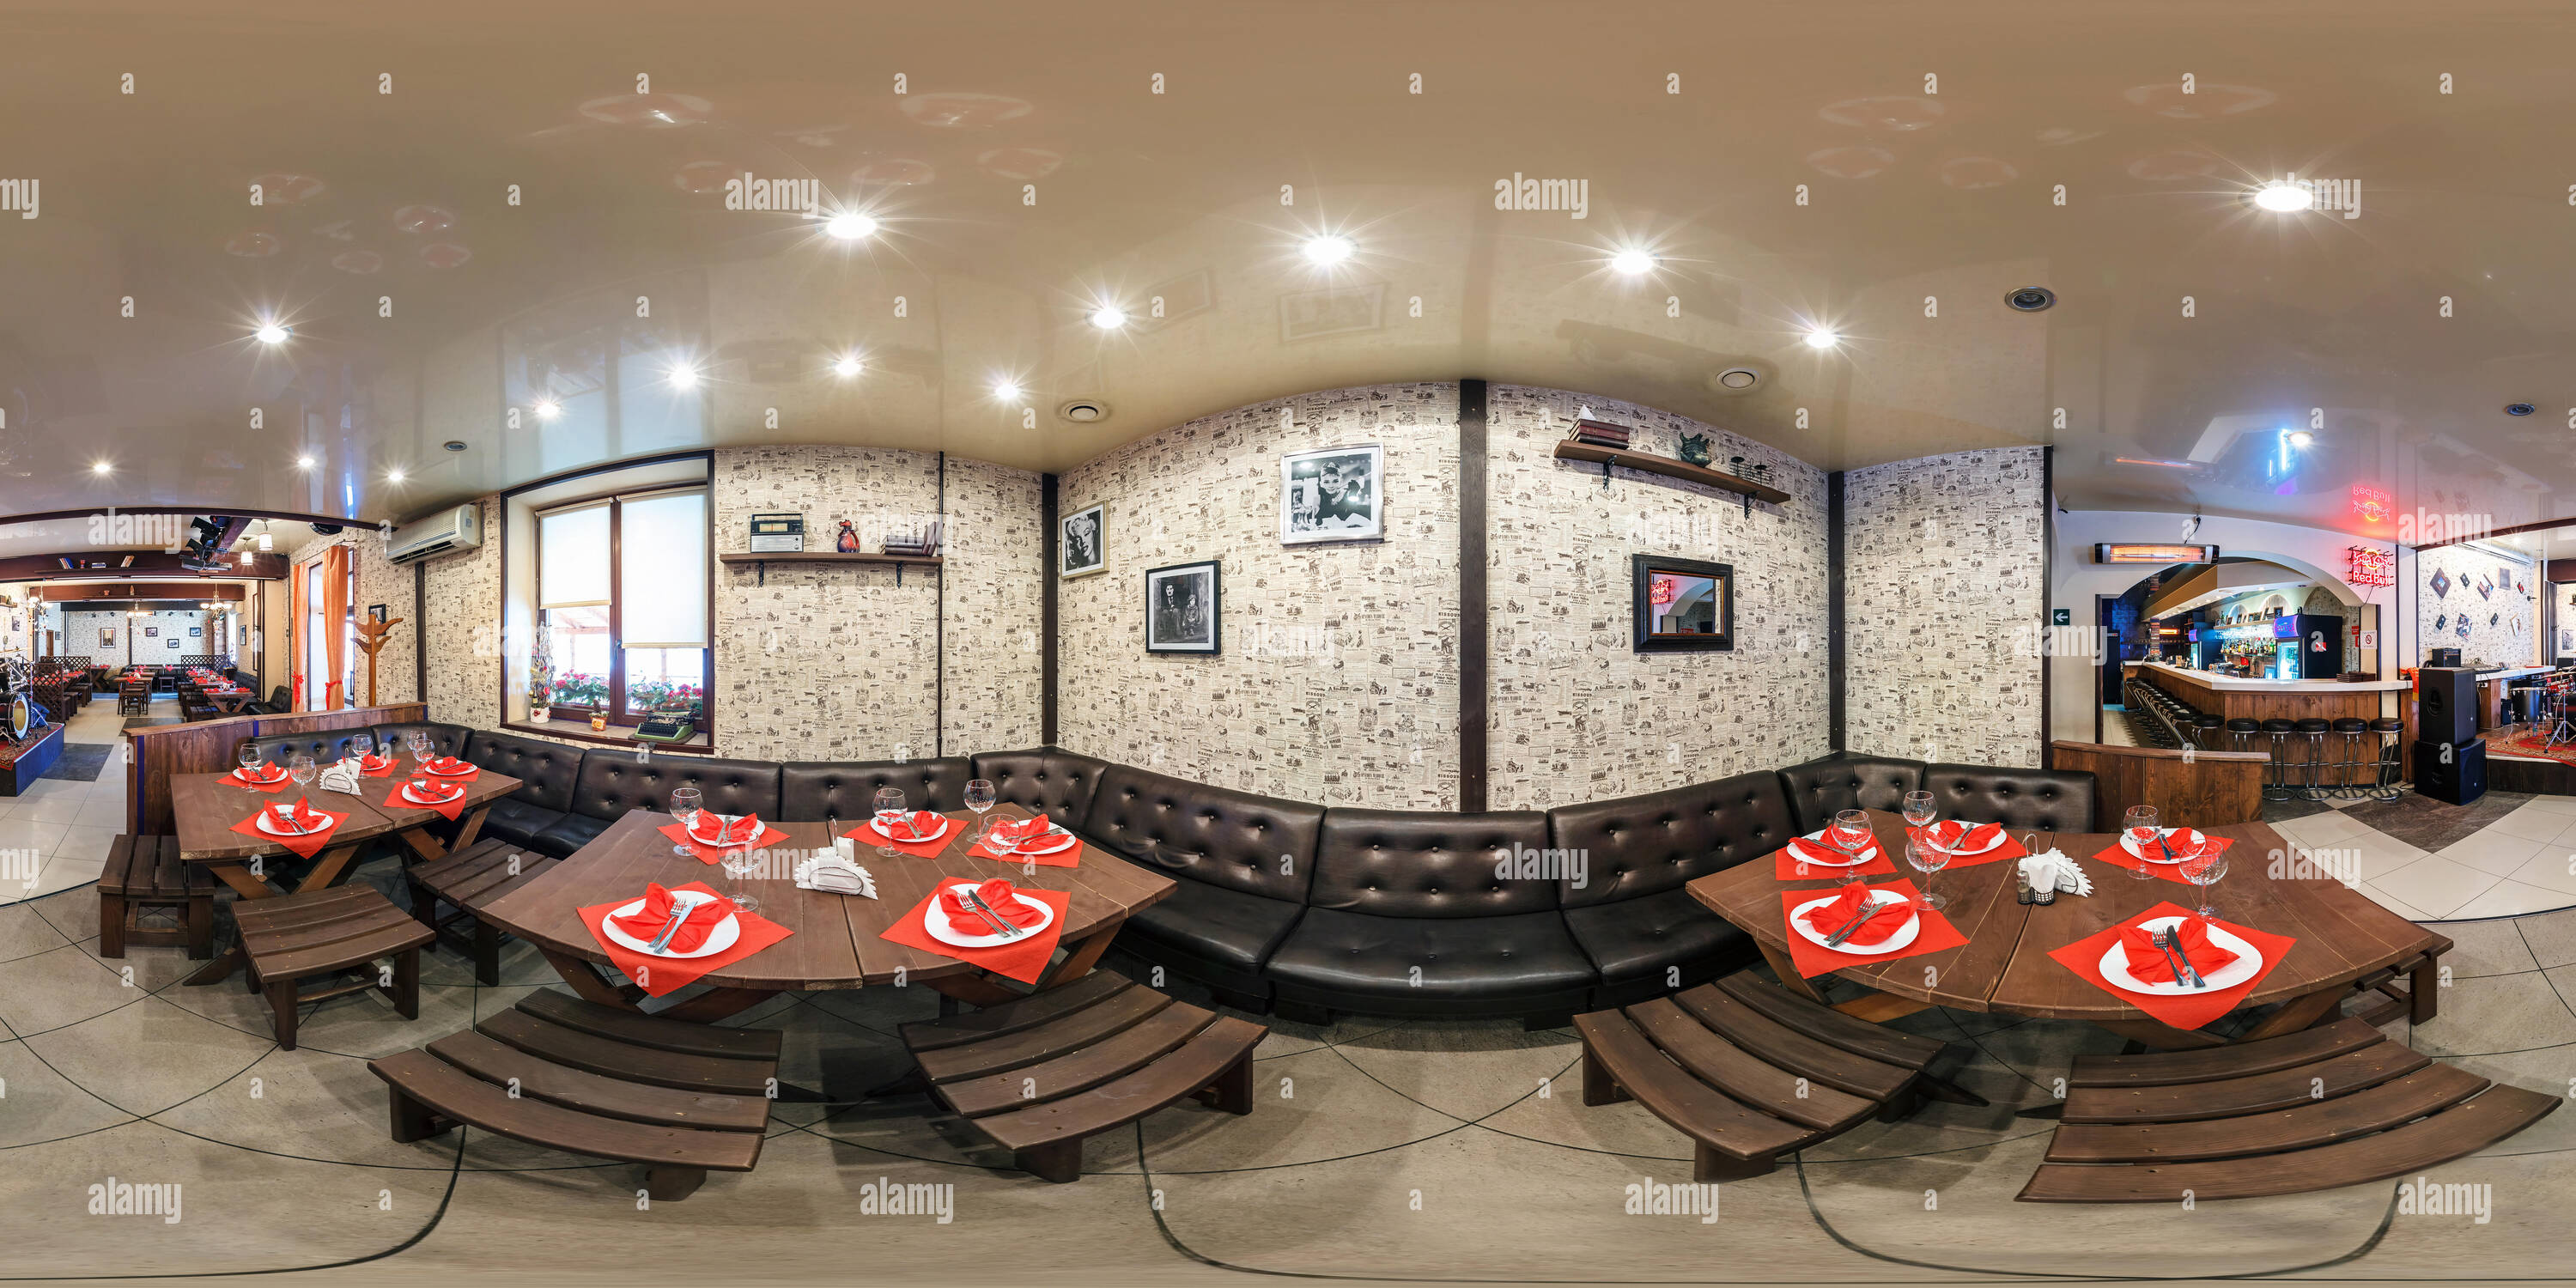 360 degree panoramic view of GOMEL, BELARUS - APRIL 7, 2013: 360 panorama inside interior of stylish cafe in vintage style. Full 360 by 180 angle degree view seamless panorama in